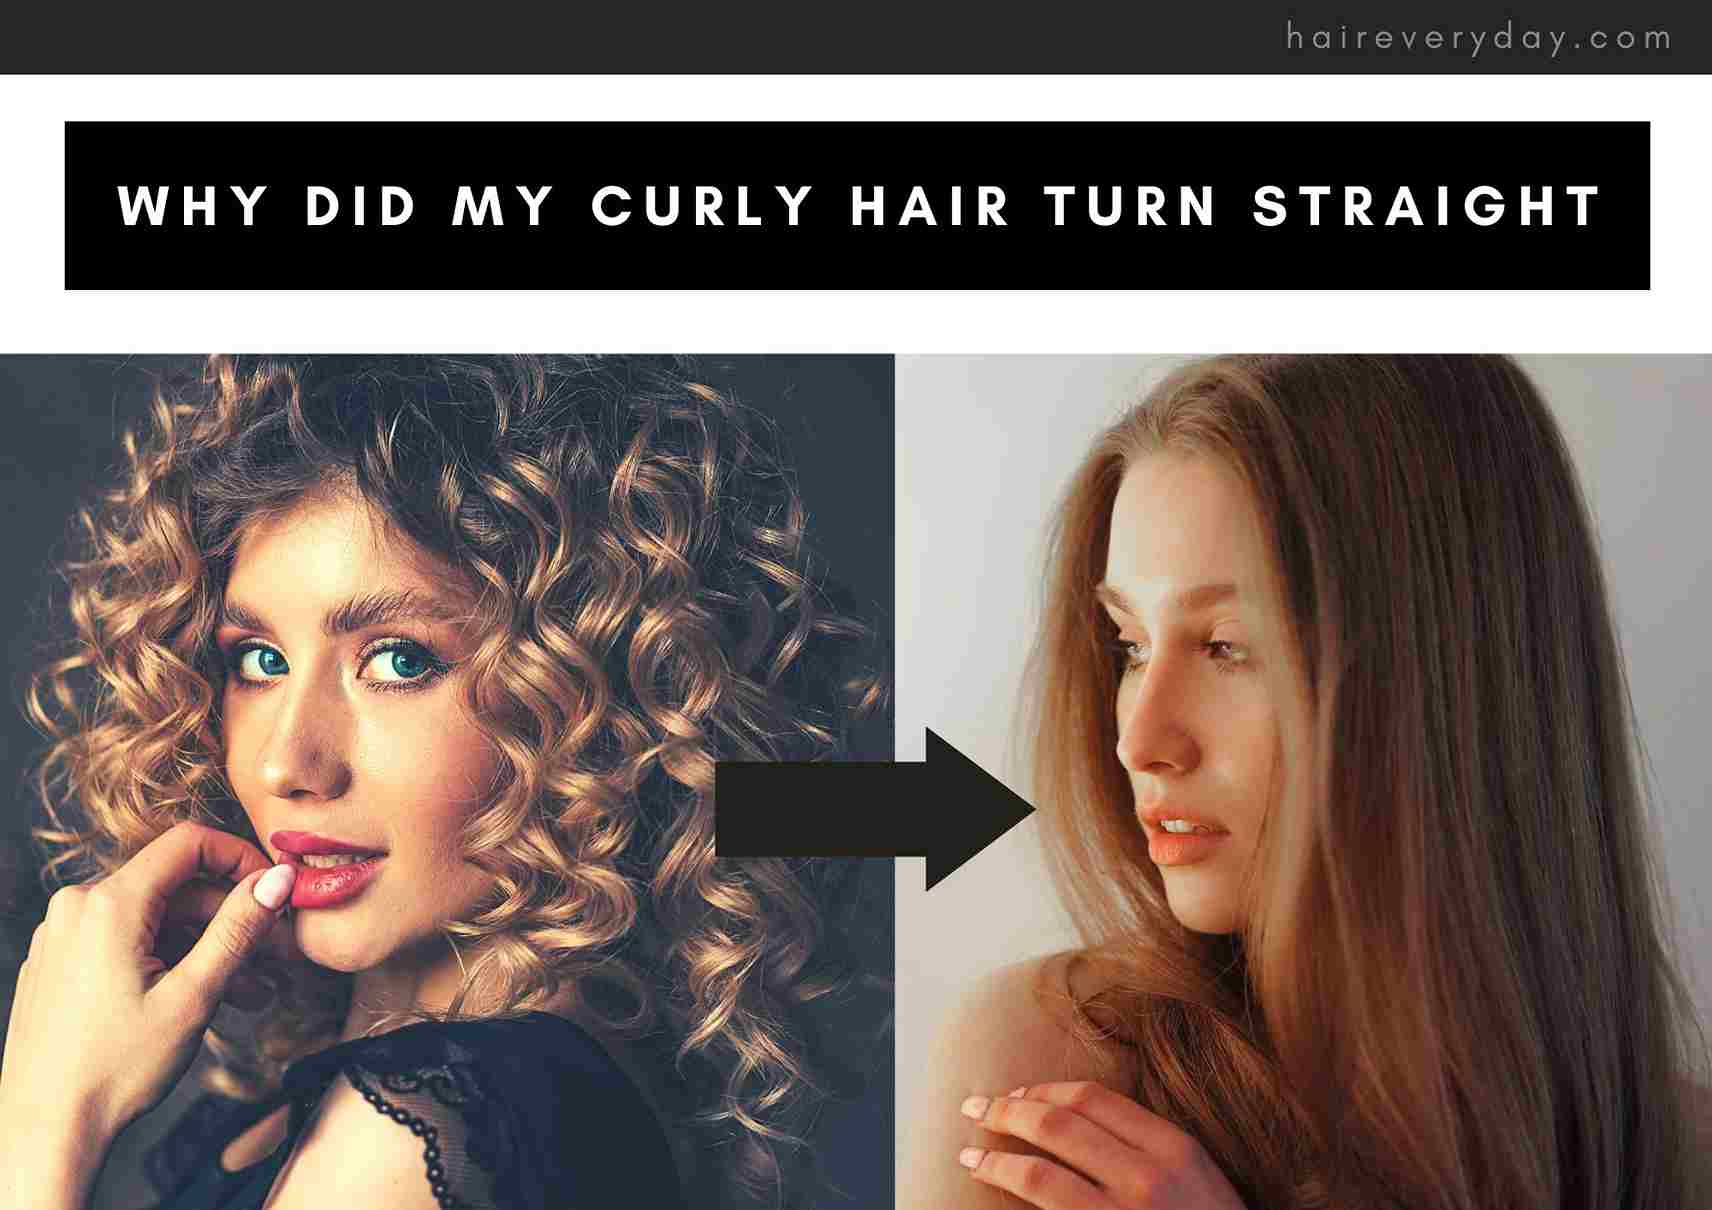 Why Has My Hair Texture Changed From Curly To Straight And 8 Ways To Get It  Back? - Hair Everyday Review